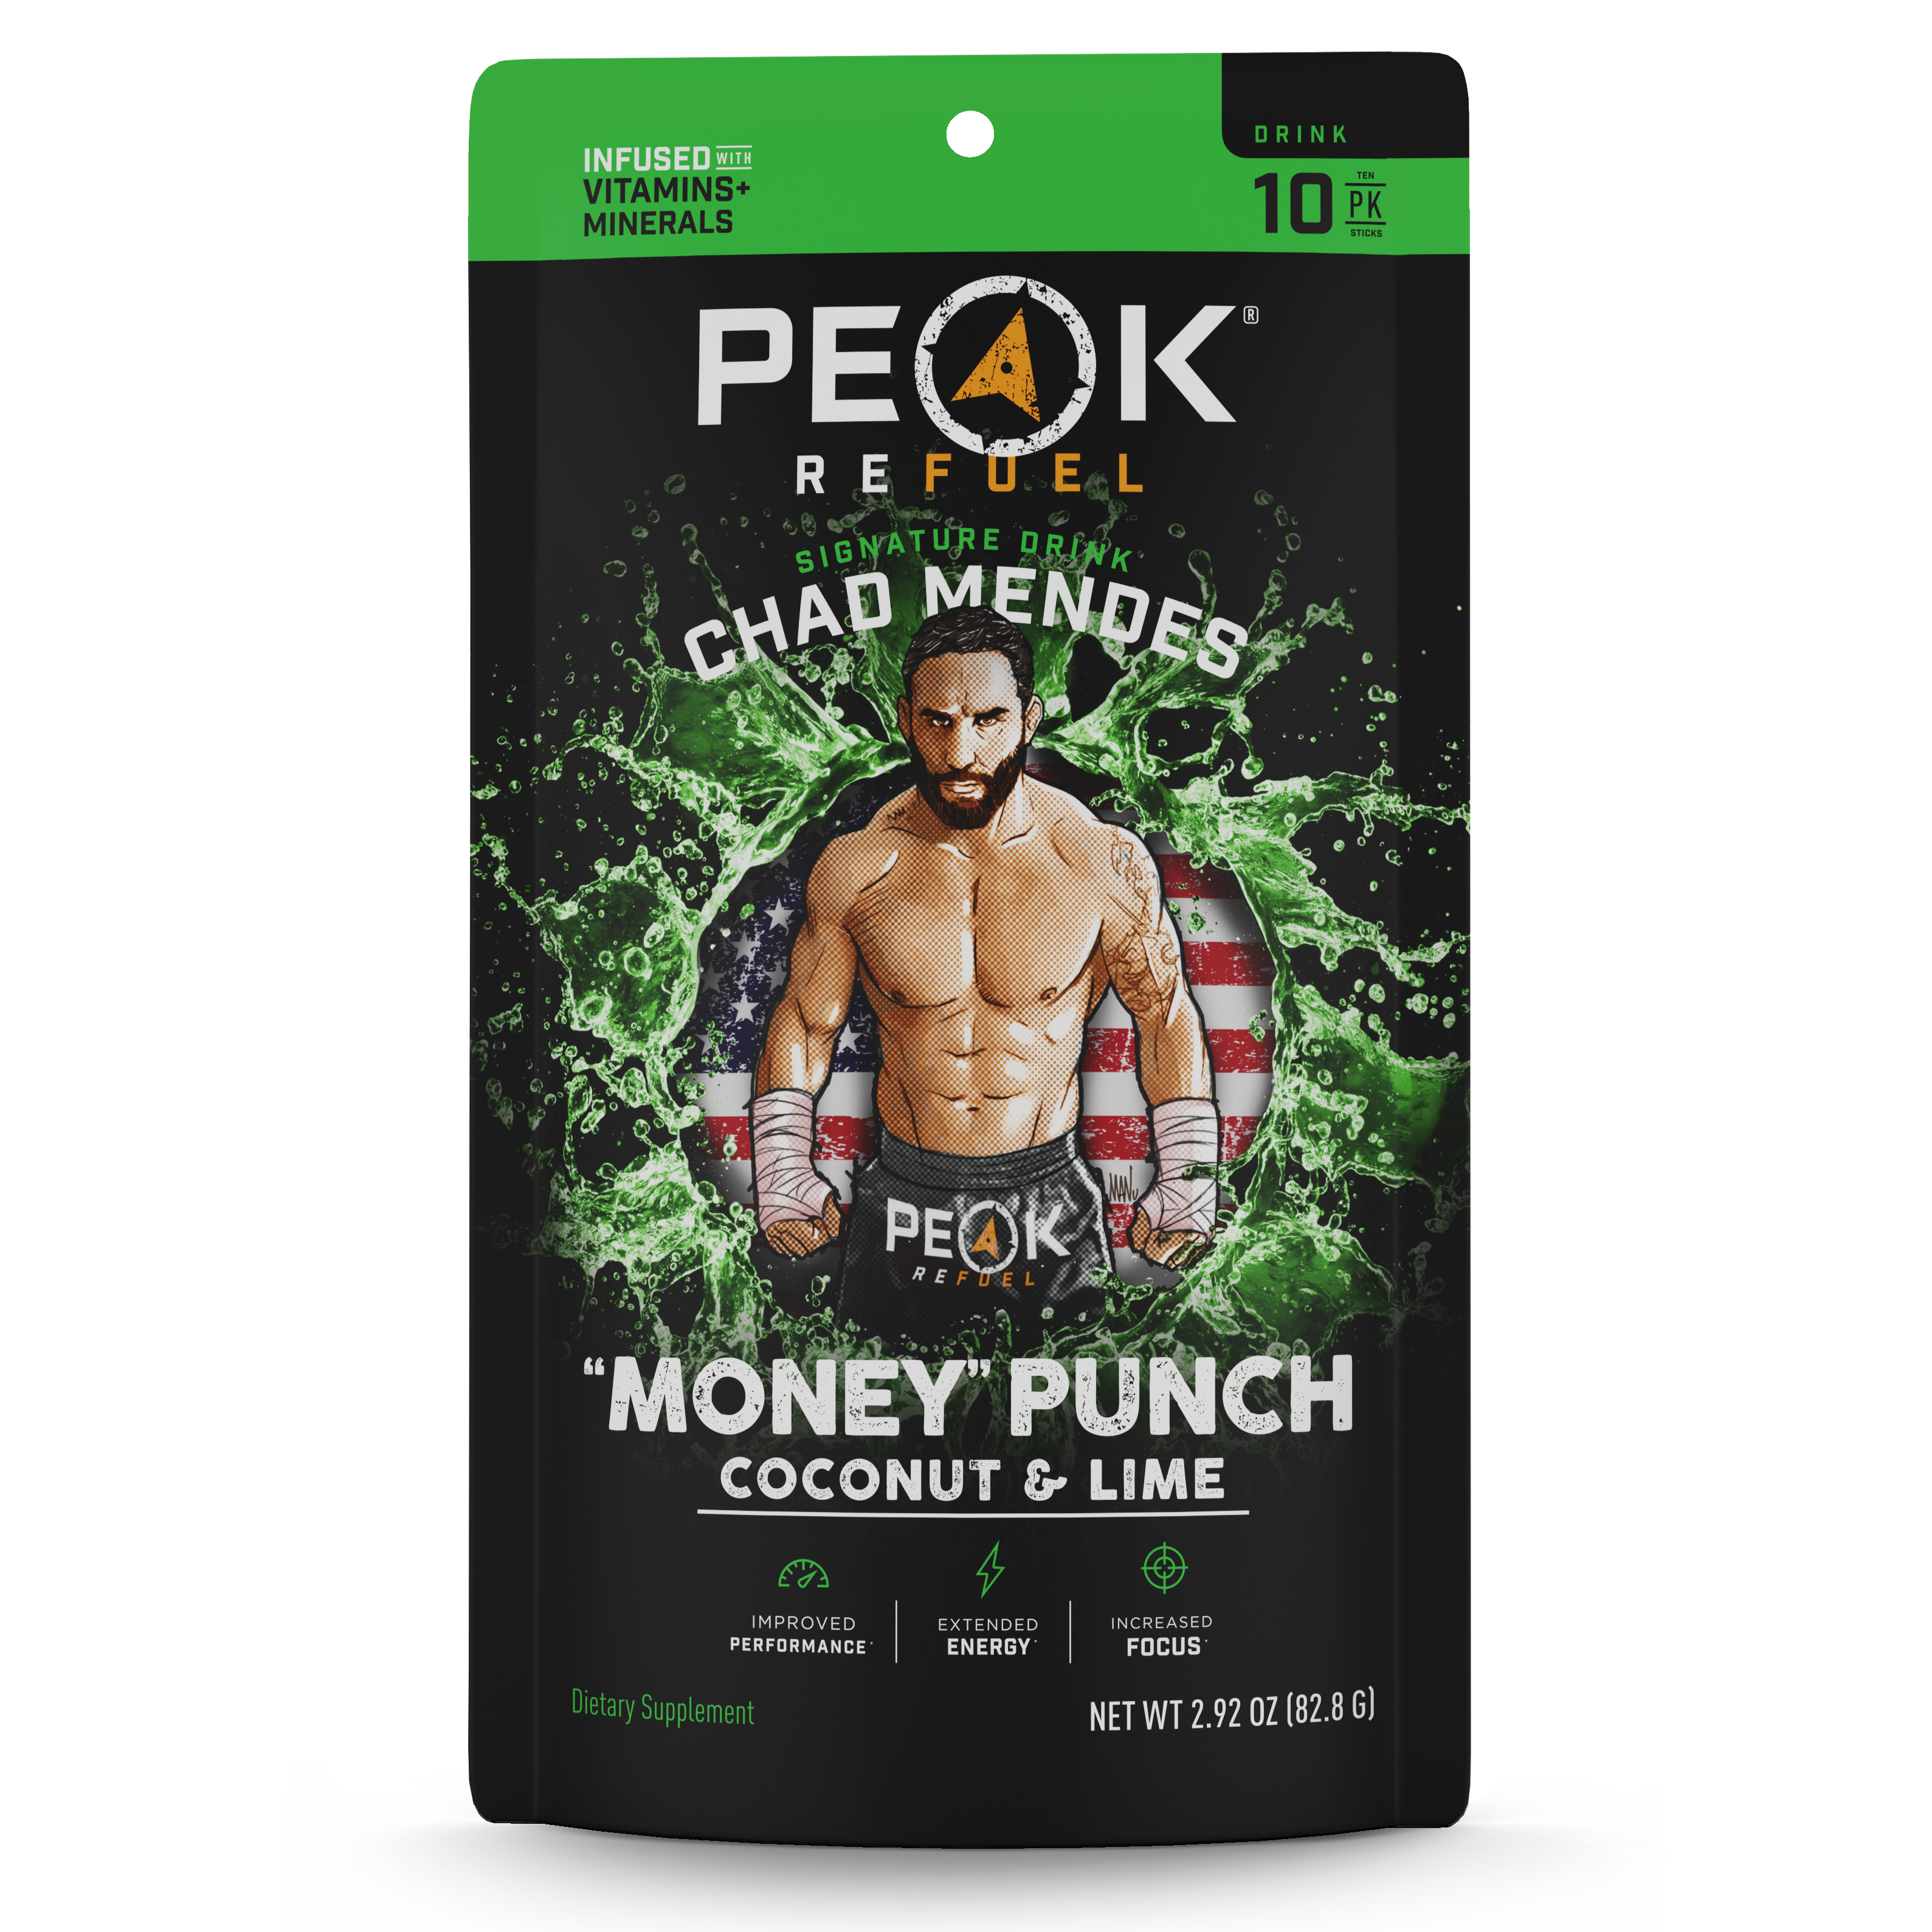 "Money" Punch Coconut & Lime Energy Drink